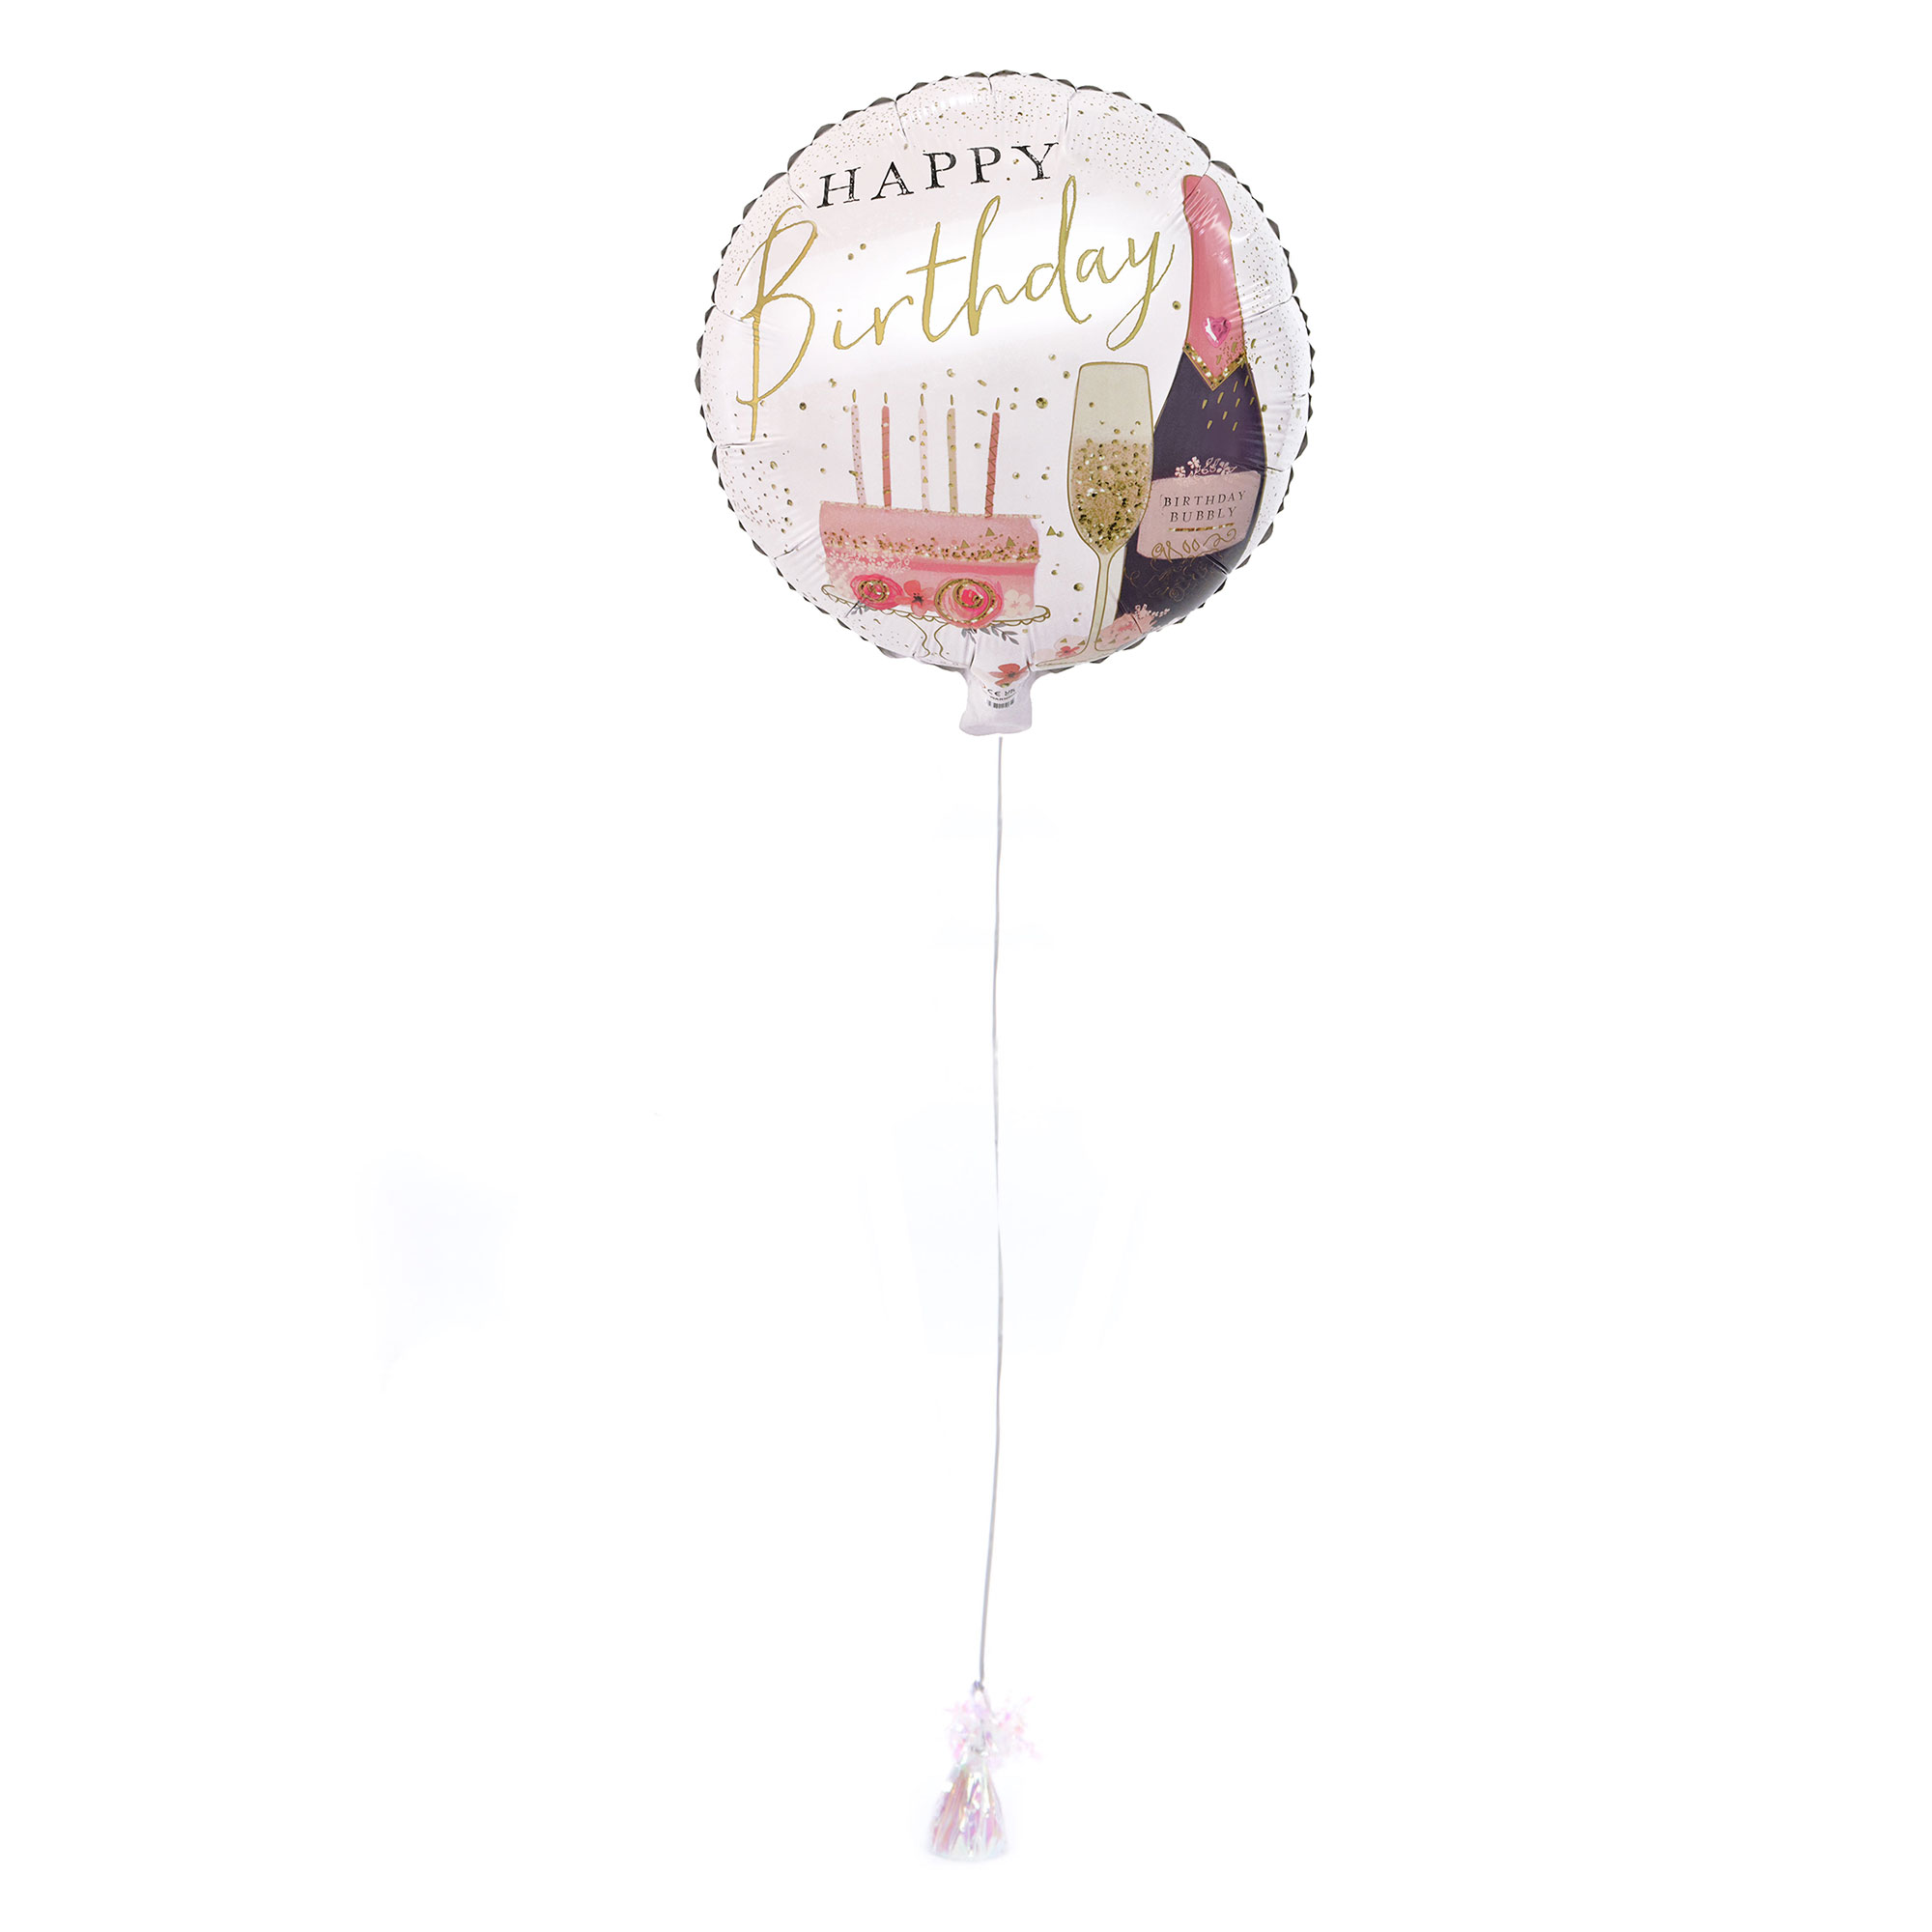 Champagne Happy Birthday Balloon & Lindt Chocolates - FREE GIFT CARD!